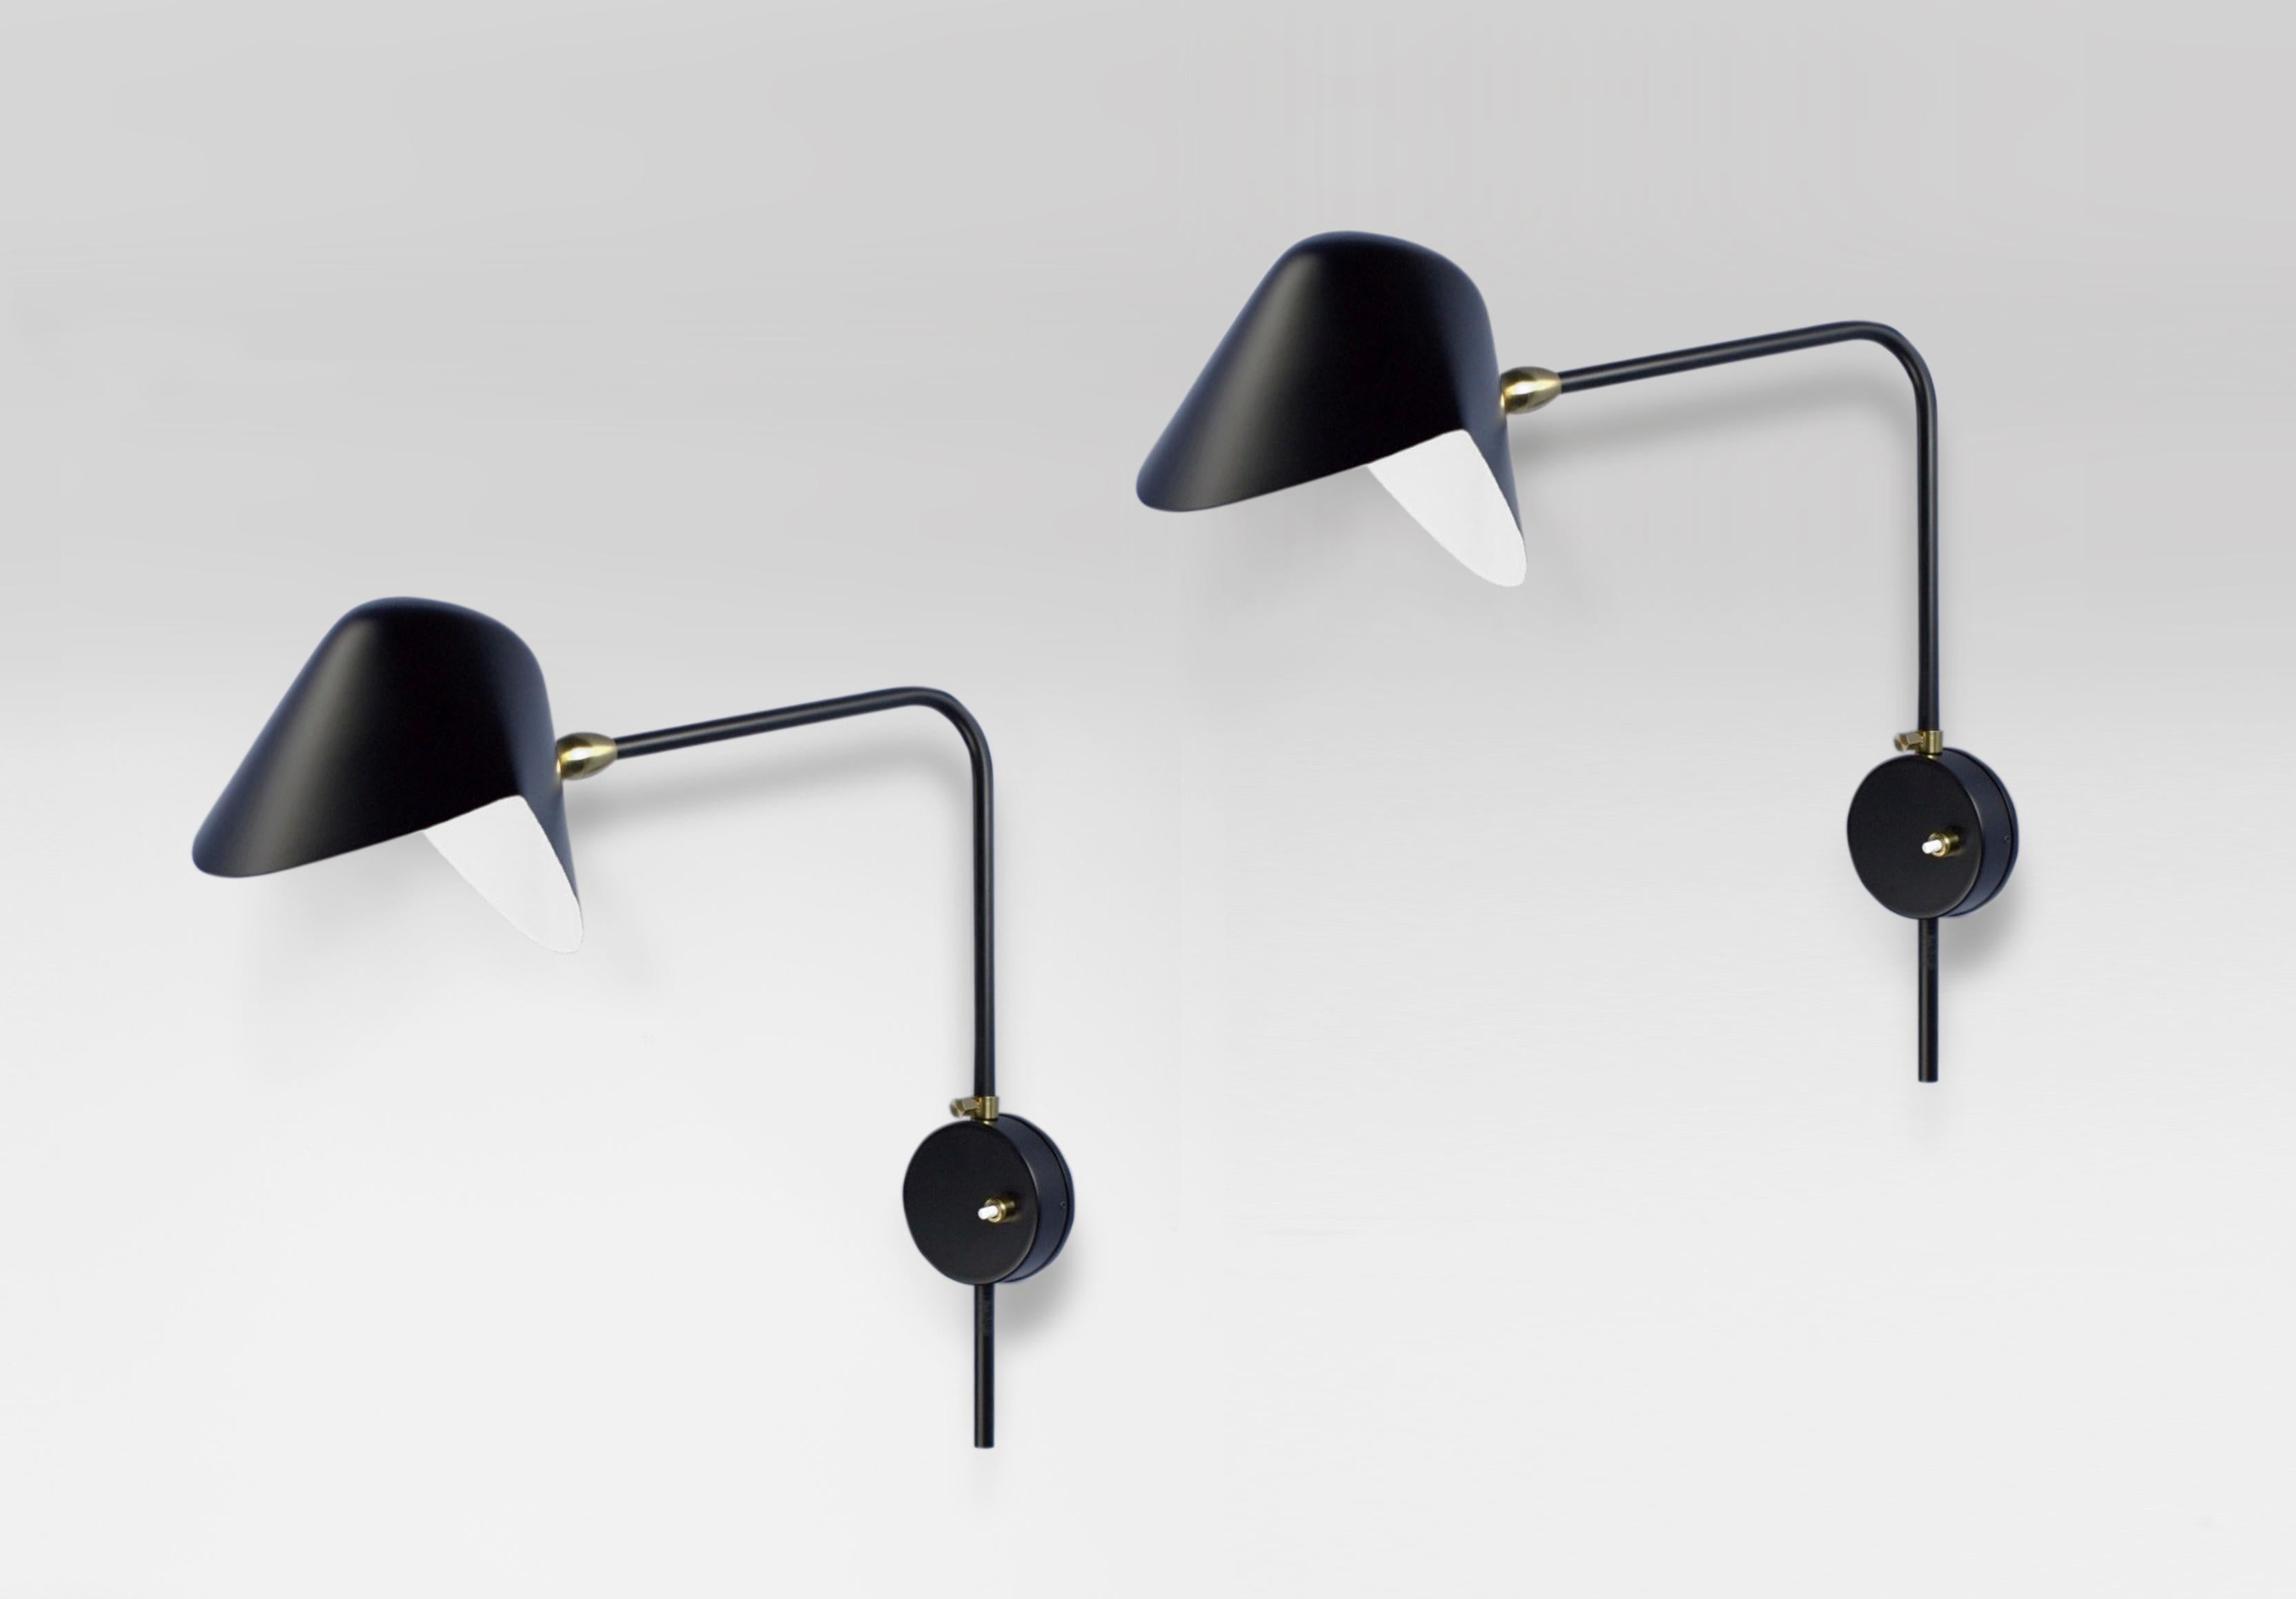 Mid-Century Modern Serge Mouille moderne Anthony Wall Lampe Whit Round Fixation Box Set en vente